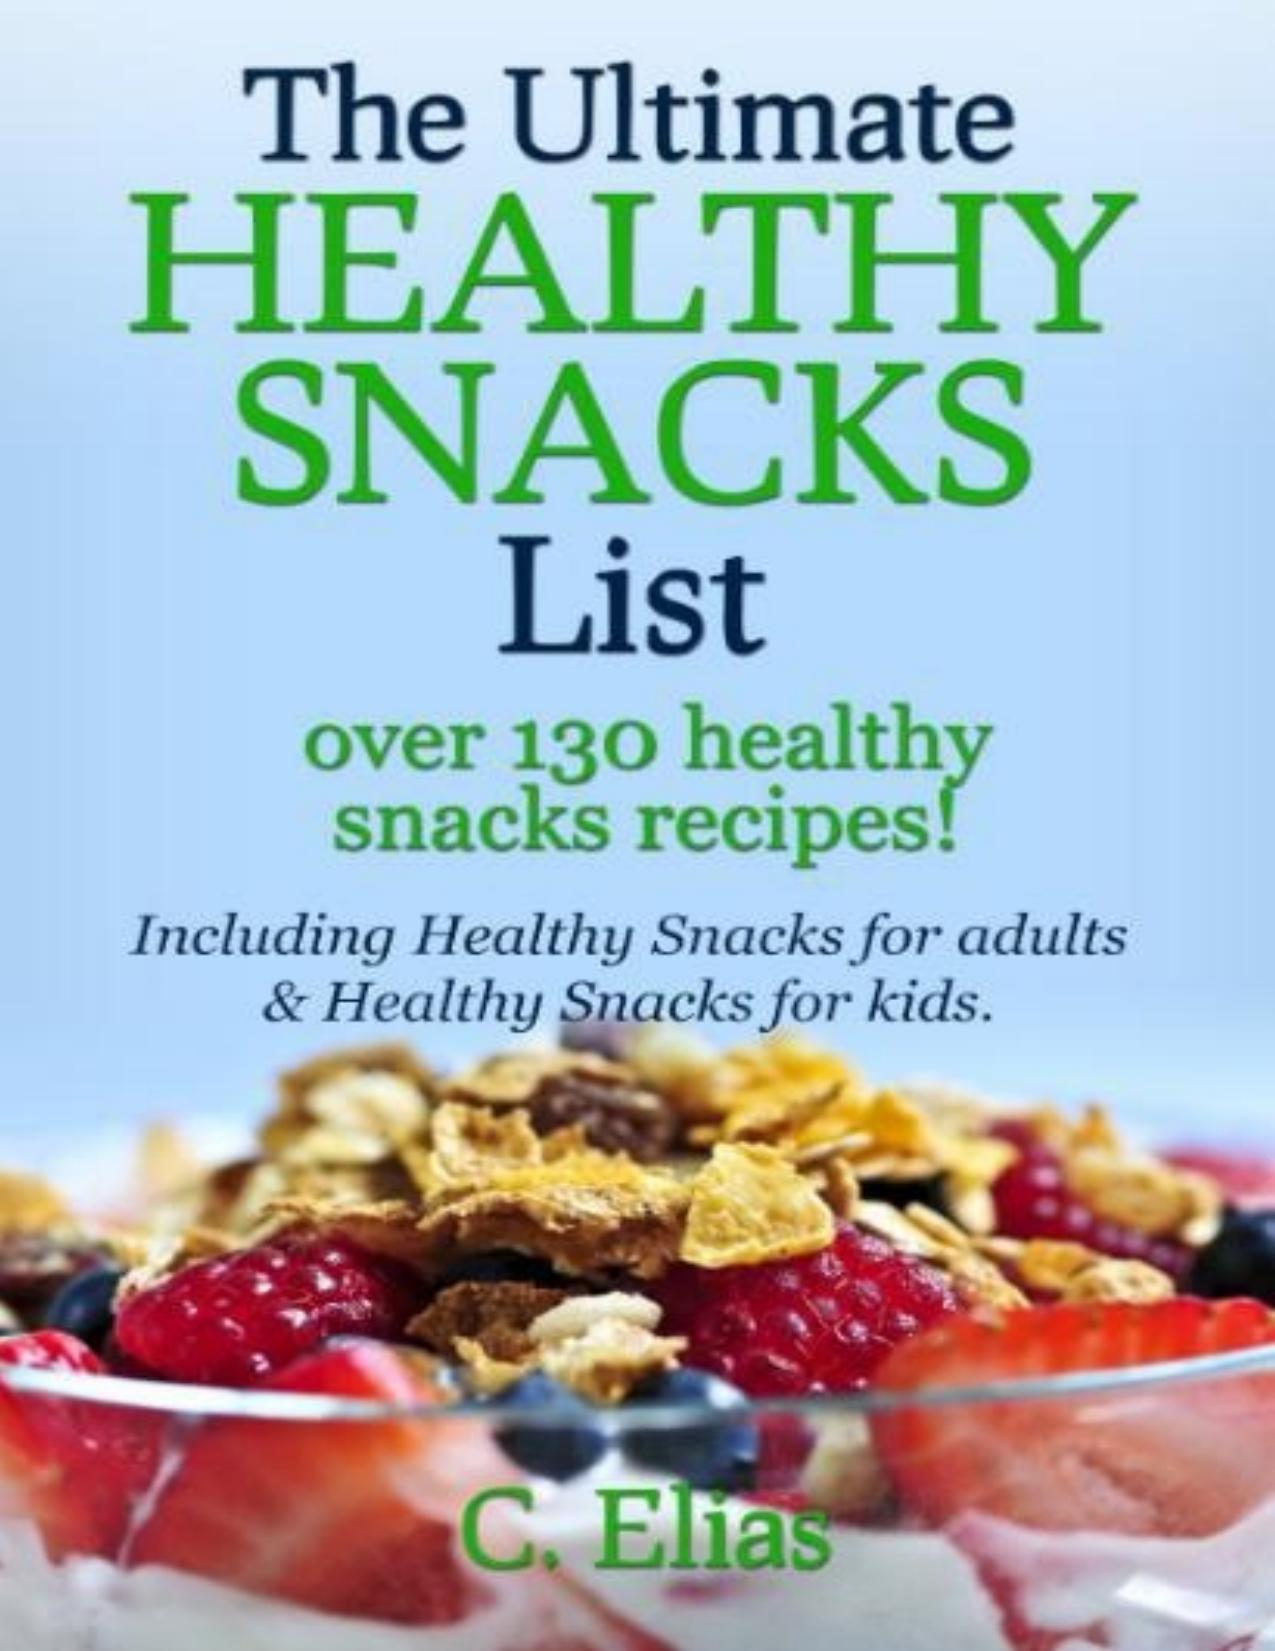 The Ultimate Healthy Snack List including Healthy Snacks for Adults \& Healthy Snacks for Kids: Discover over 130 Healthy Snack Recipes - Fruit Snacks, ... Recipes, Gluten-Free Snacks and more! - PDFDrive.com